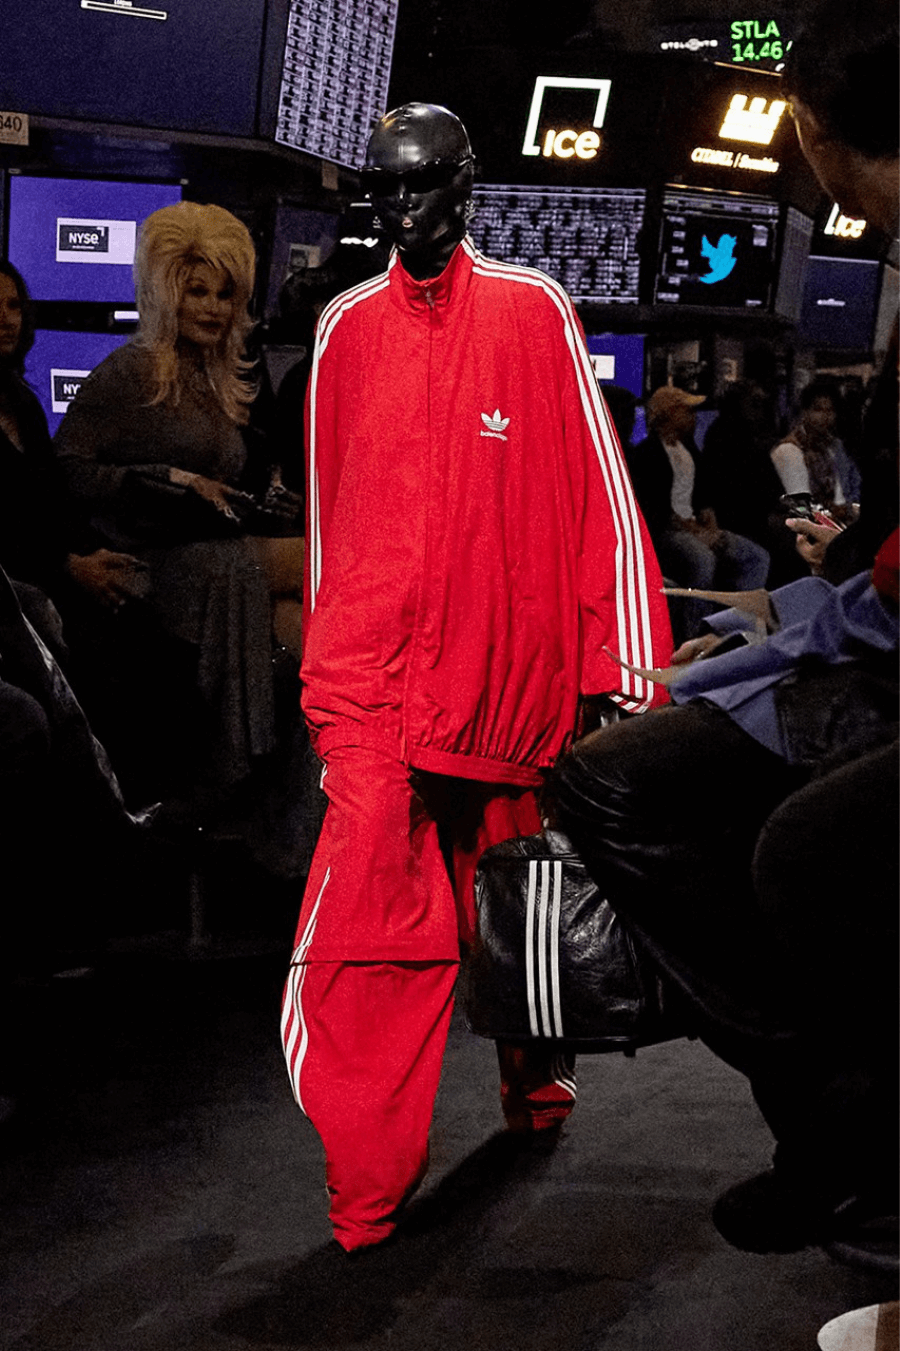 The Balenciaga x Adidas Collaboration Is Here & Selling Fast - The Cool Hour | Style Inspiration